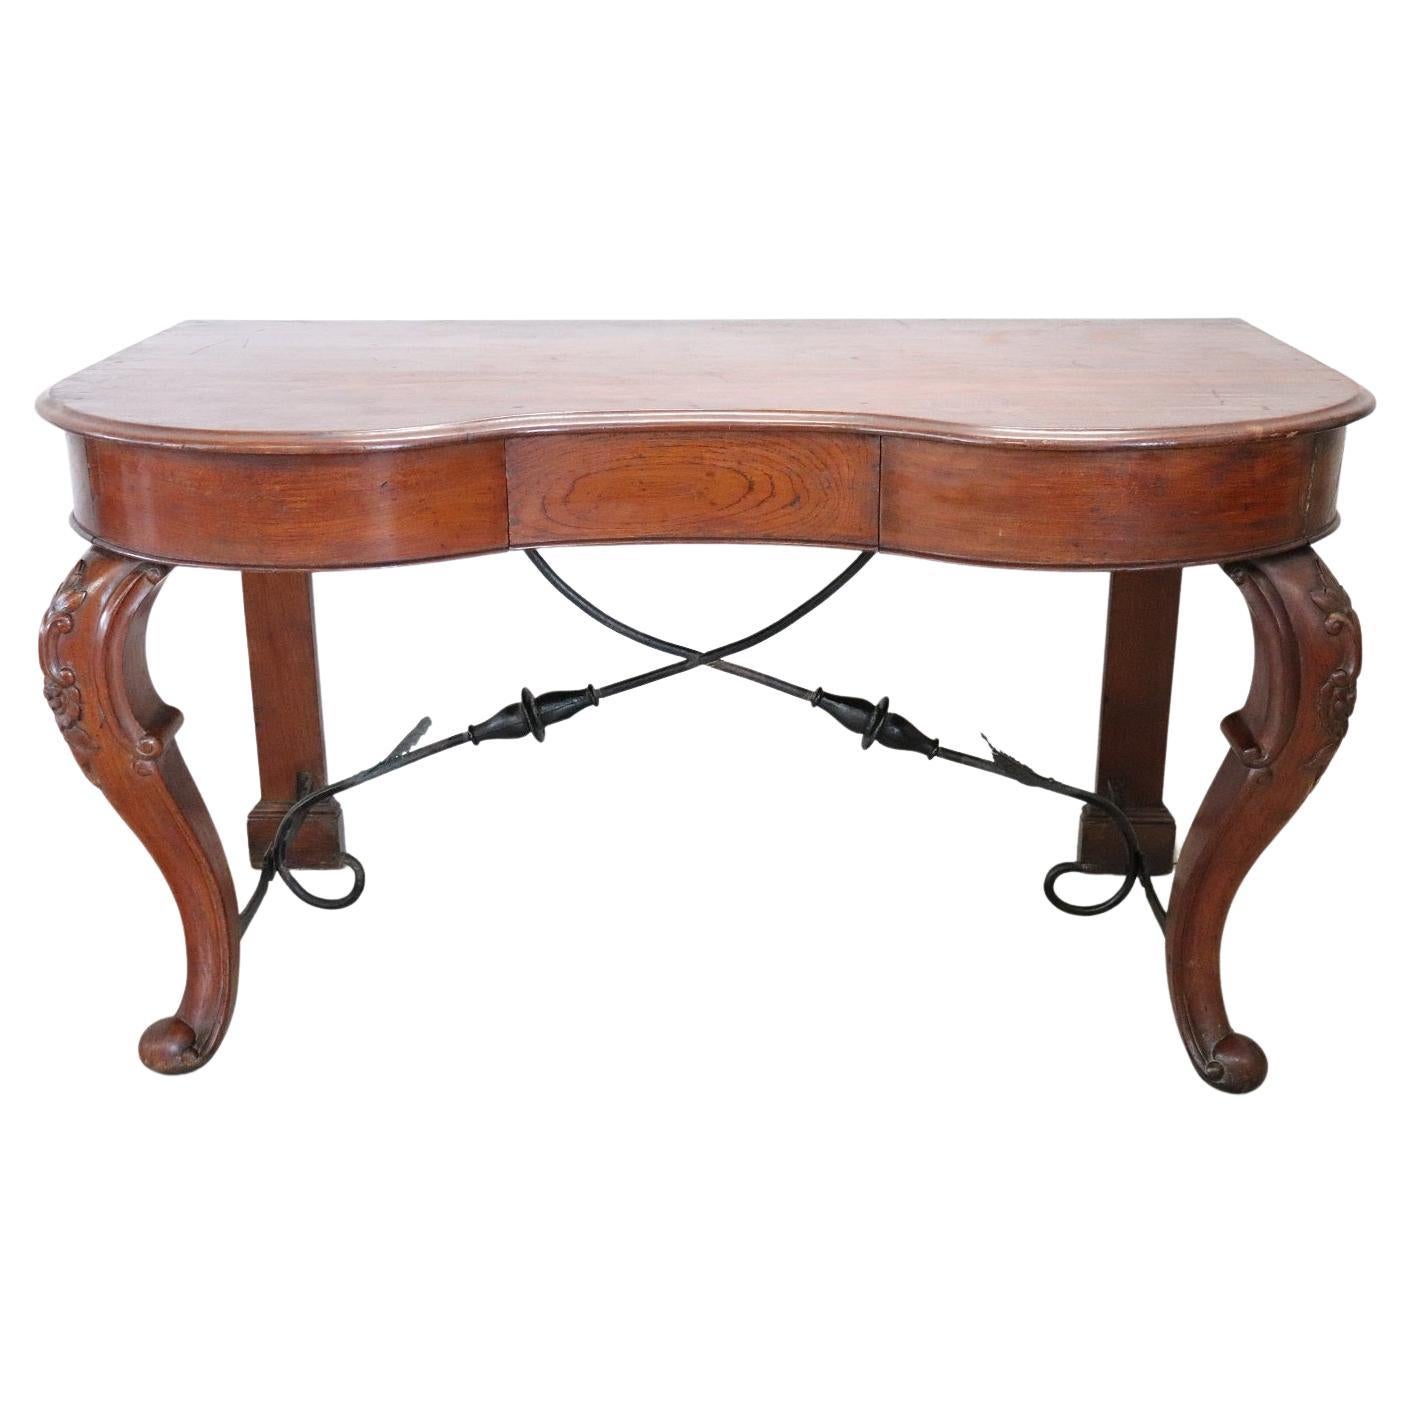 18th Century Italian Solid Oak Wood Antique Console Table For Sale